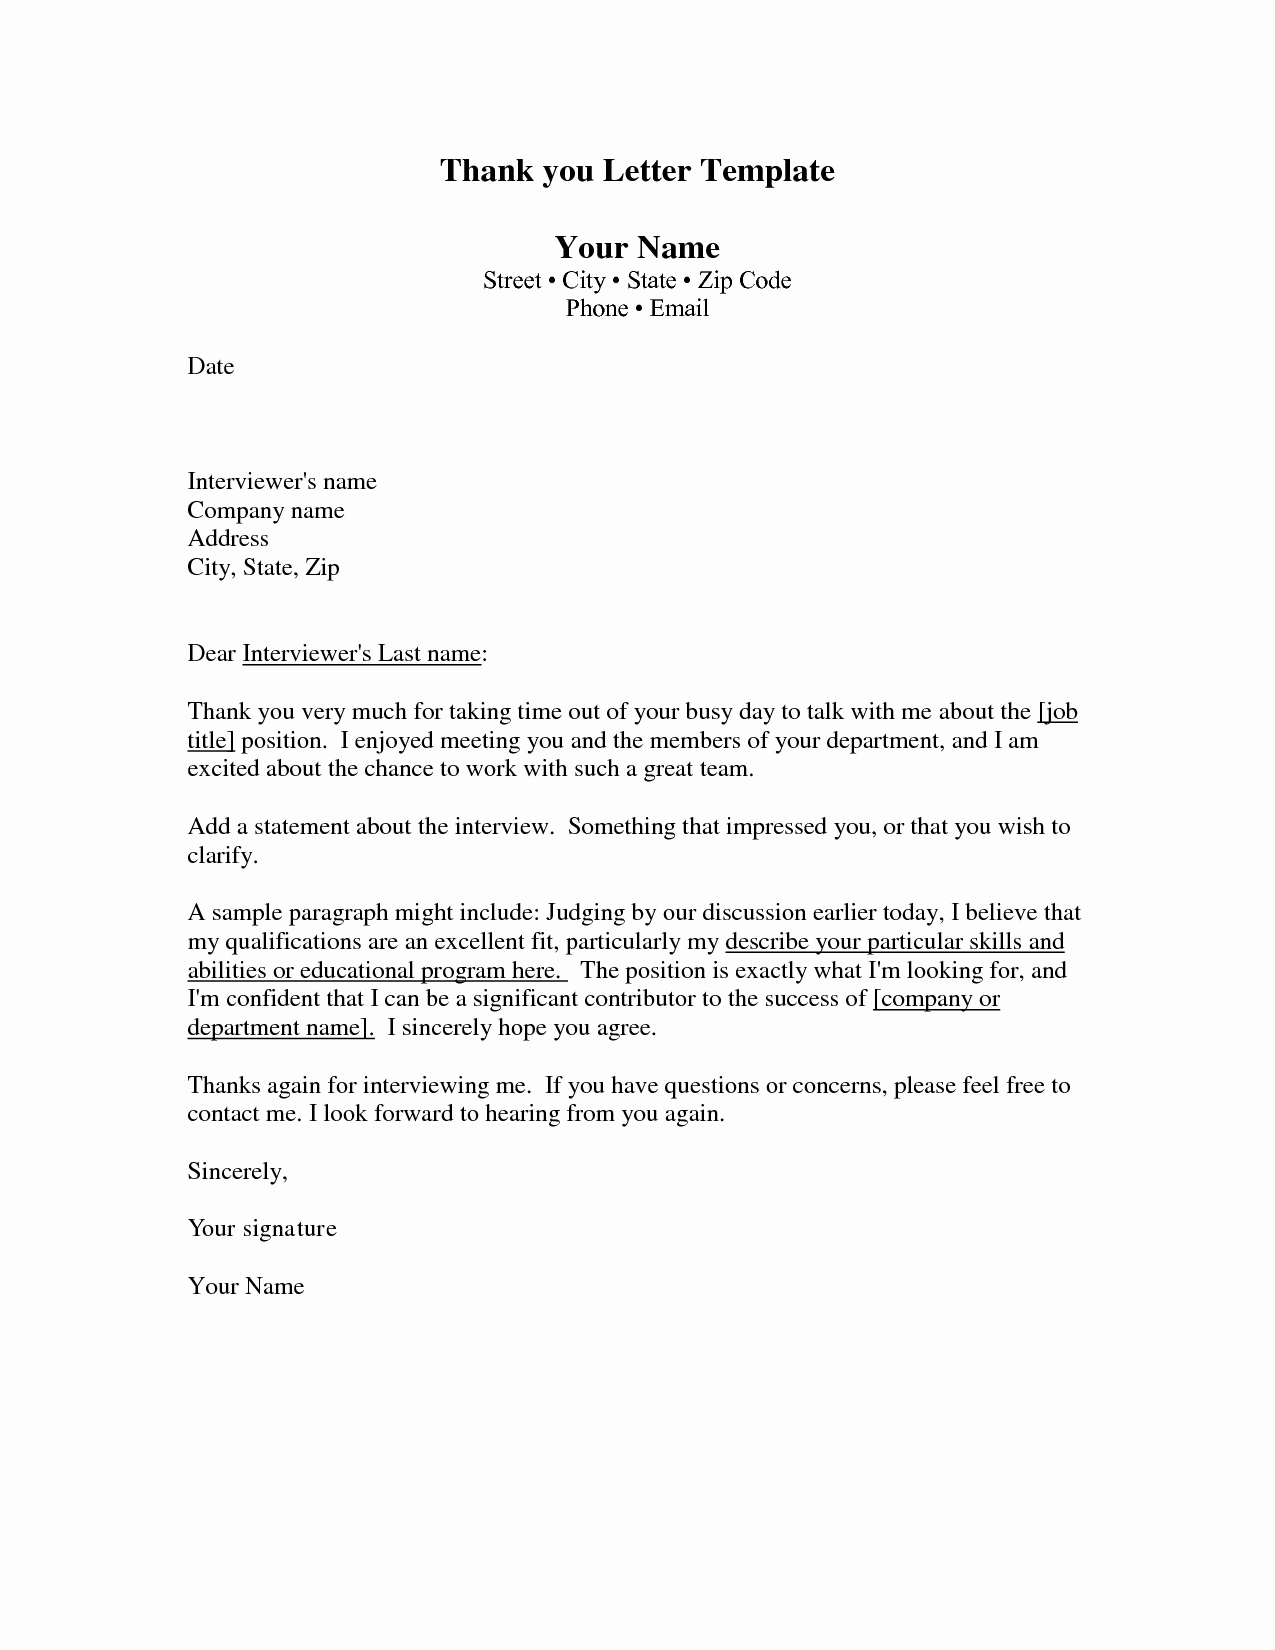 Thank You Letter Business Template New Professional Business Thank You Letter